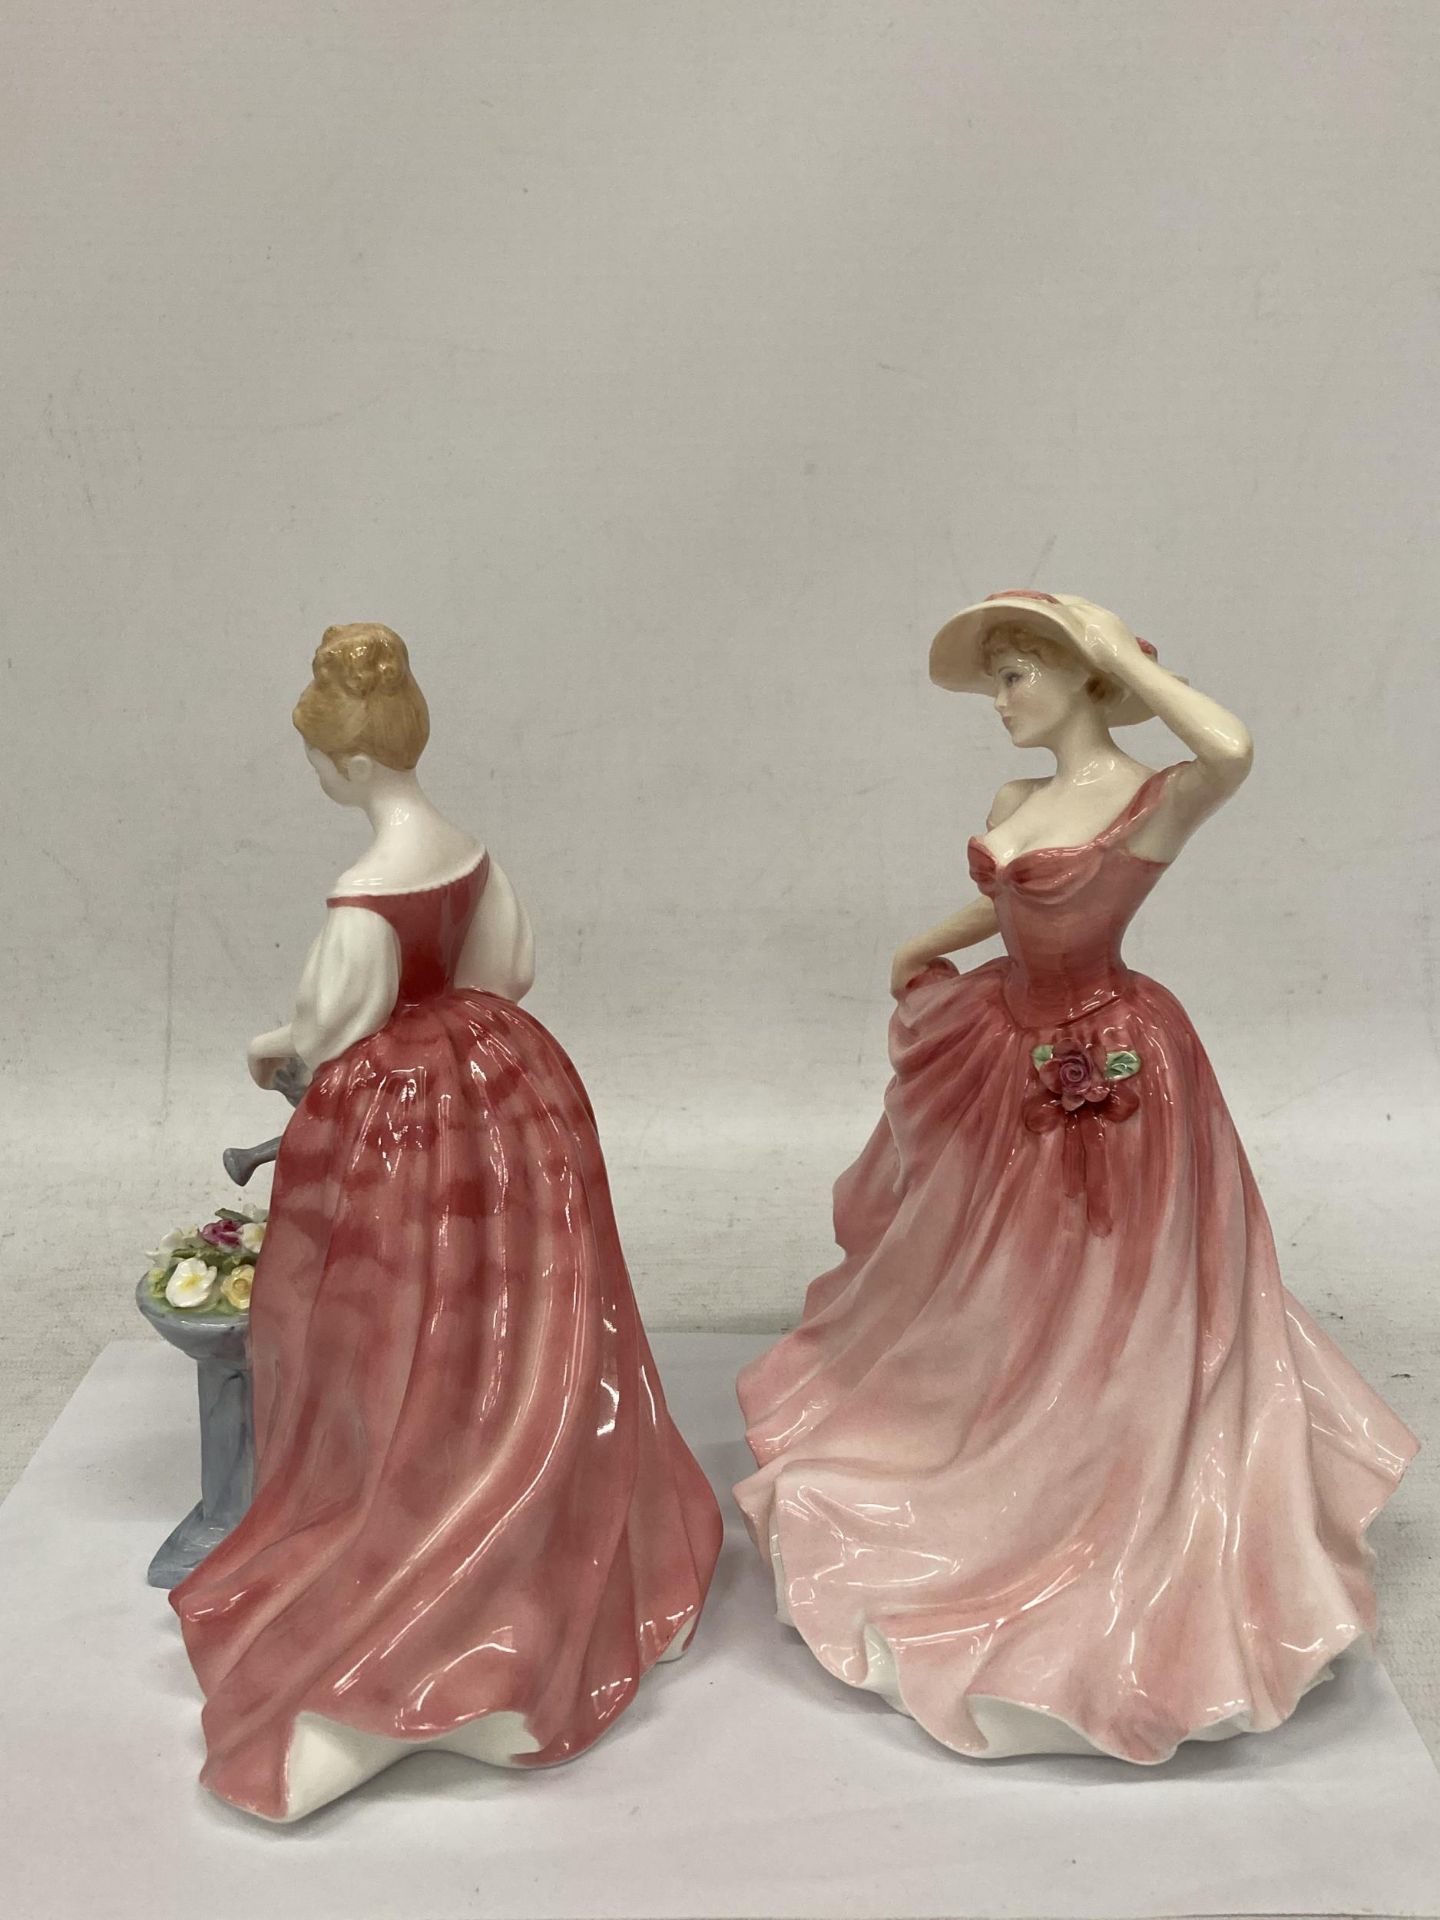 TWO ROYAL DOULTON FIGURINES "ALEXANDRA" HN 3292 AND LADY OF THE YEAR 1997 HN 3992 "ELLEN" - Bild 3 aus 4